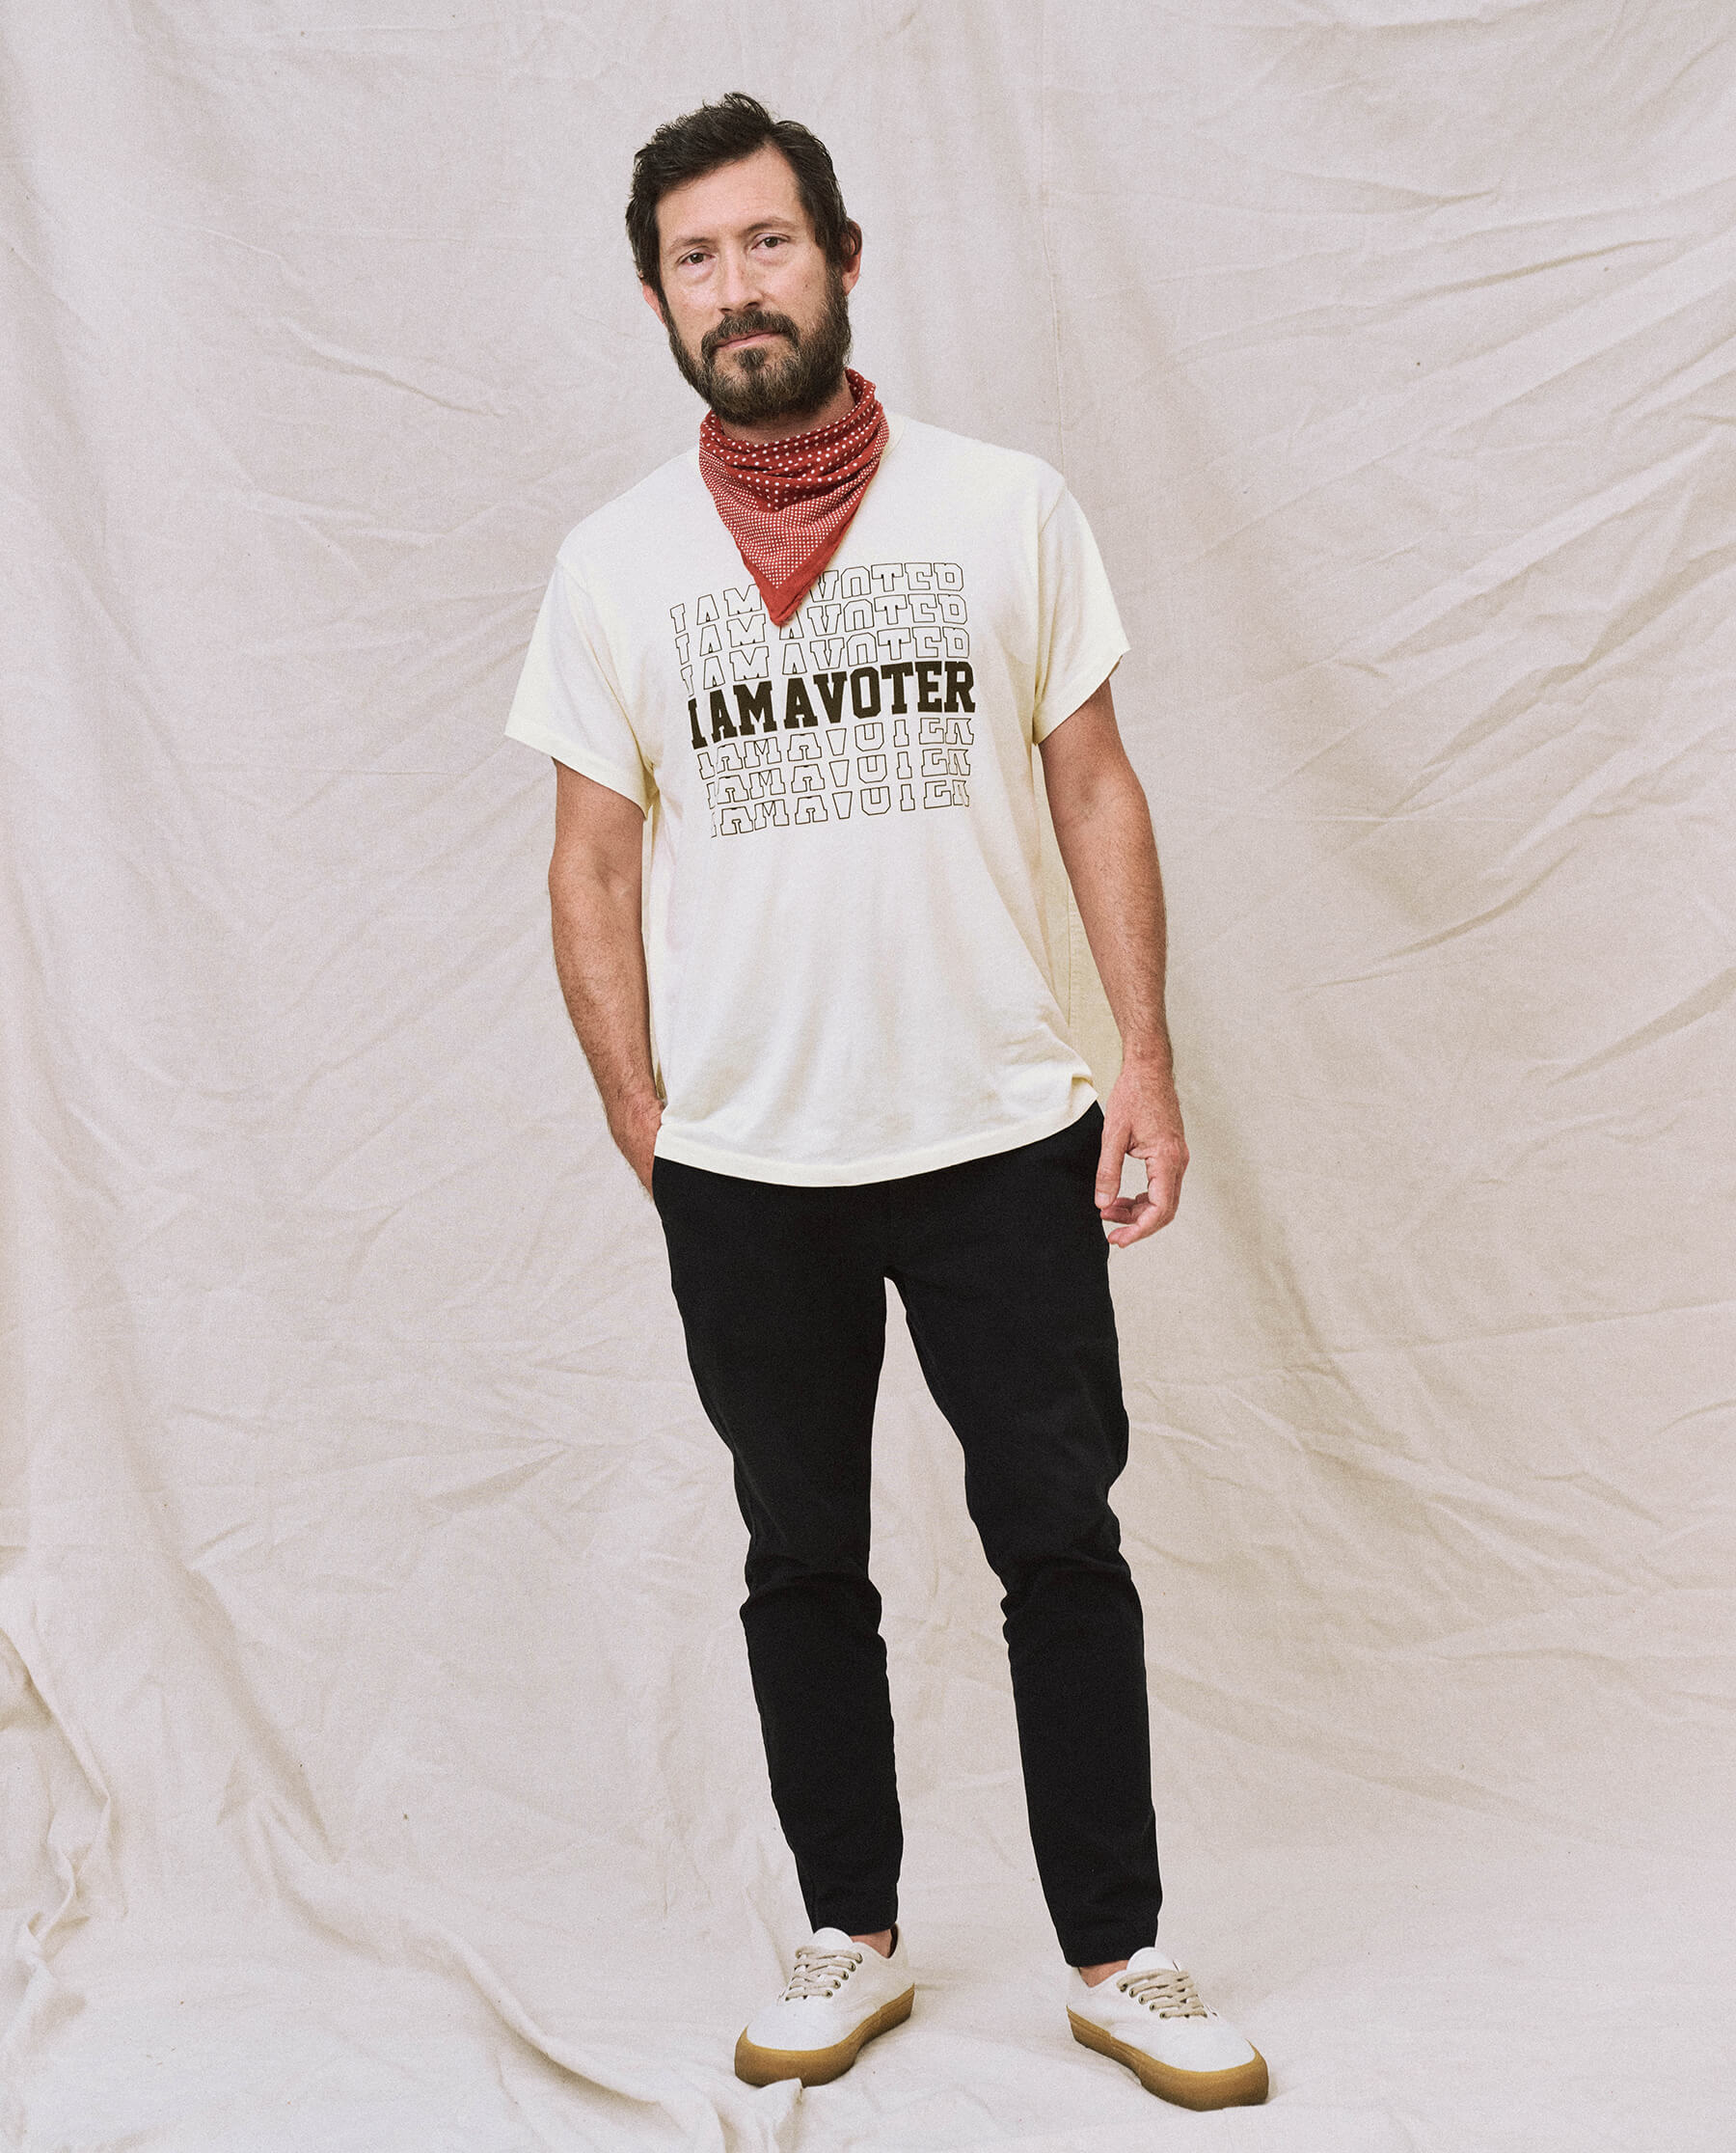 Limited Edition: The Men's I Am A Voter Boxy Crew. -- Washed White TEES THE GREAT. MAN.